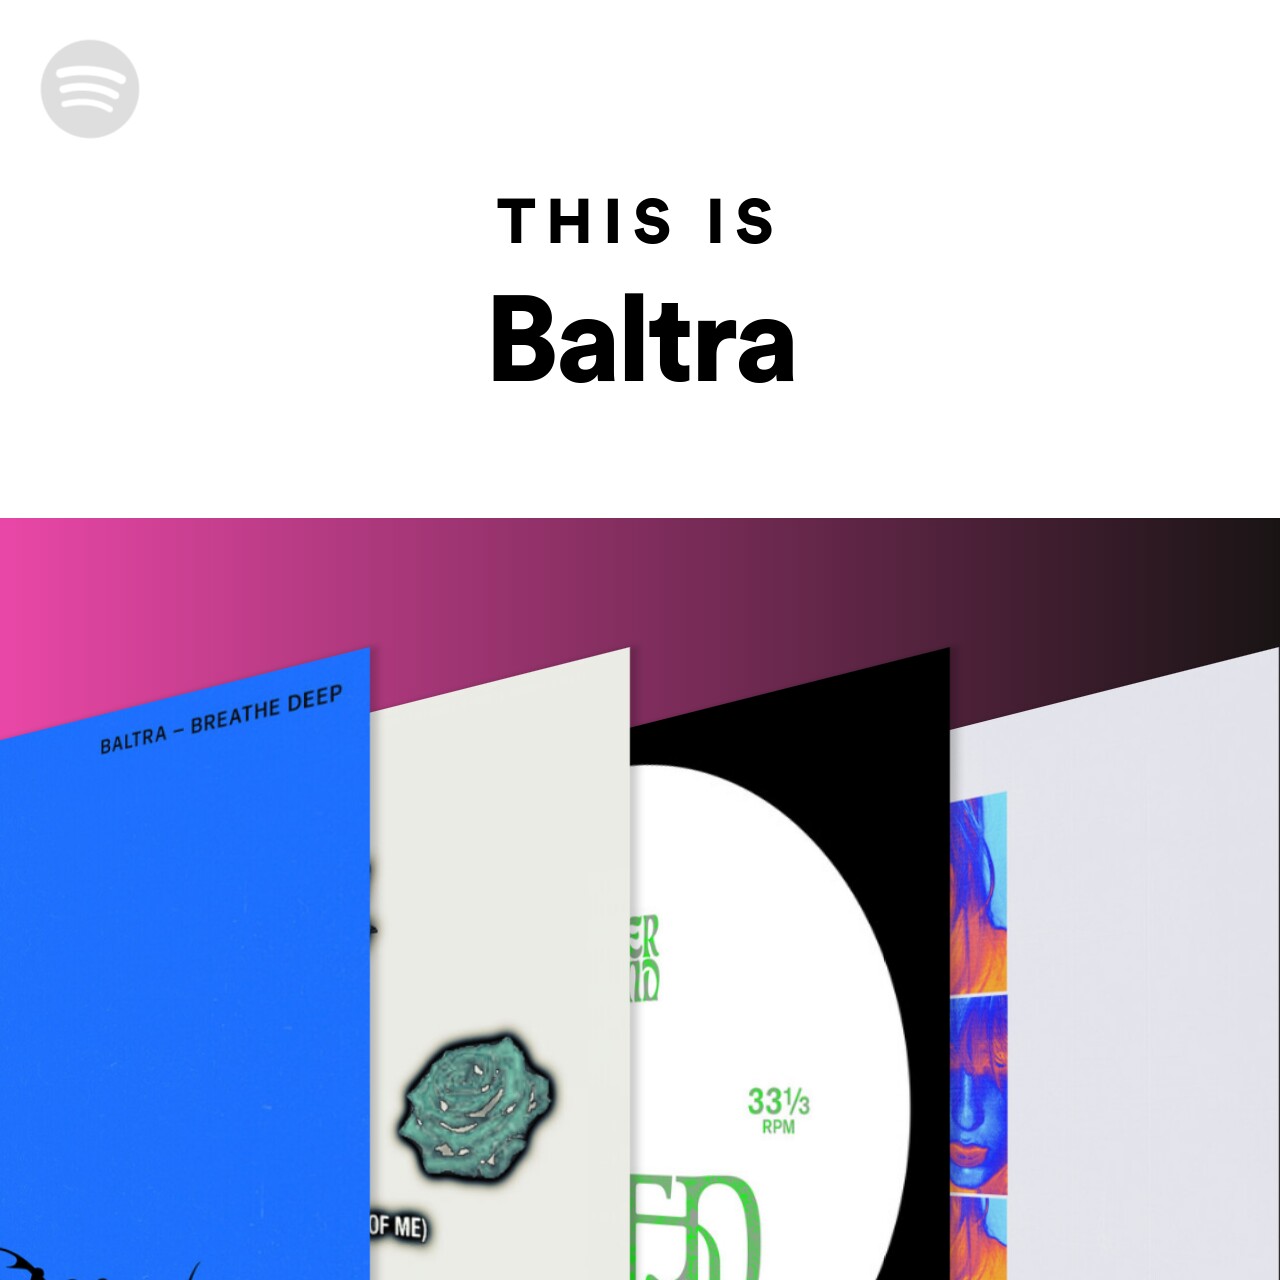 This Is Baltra